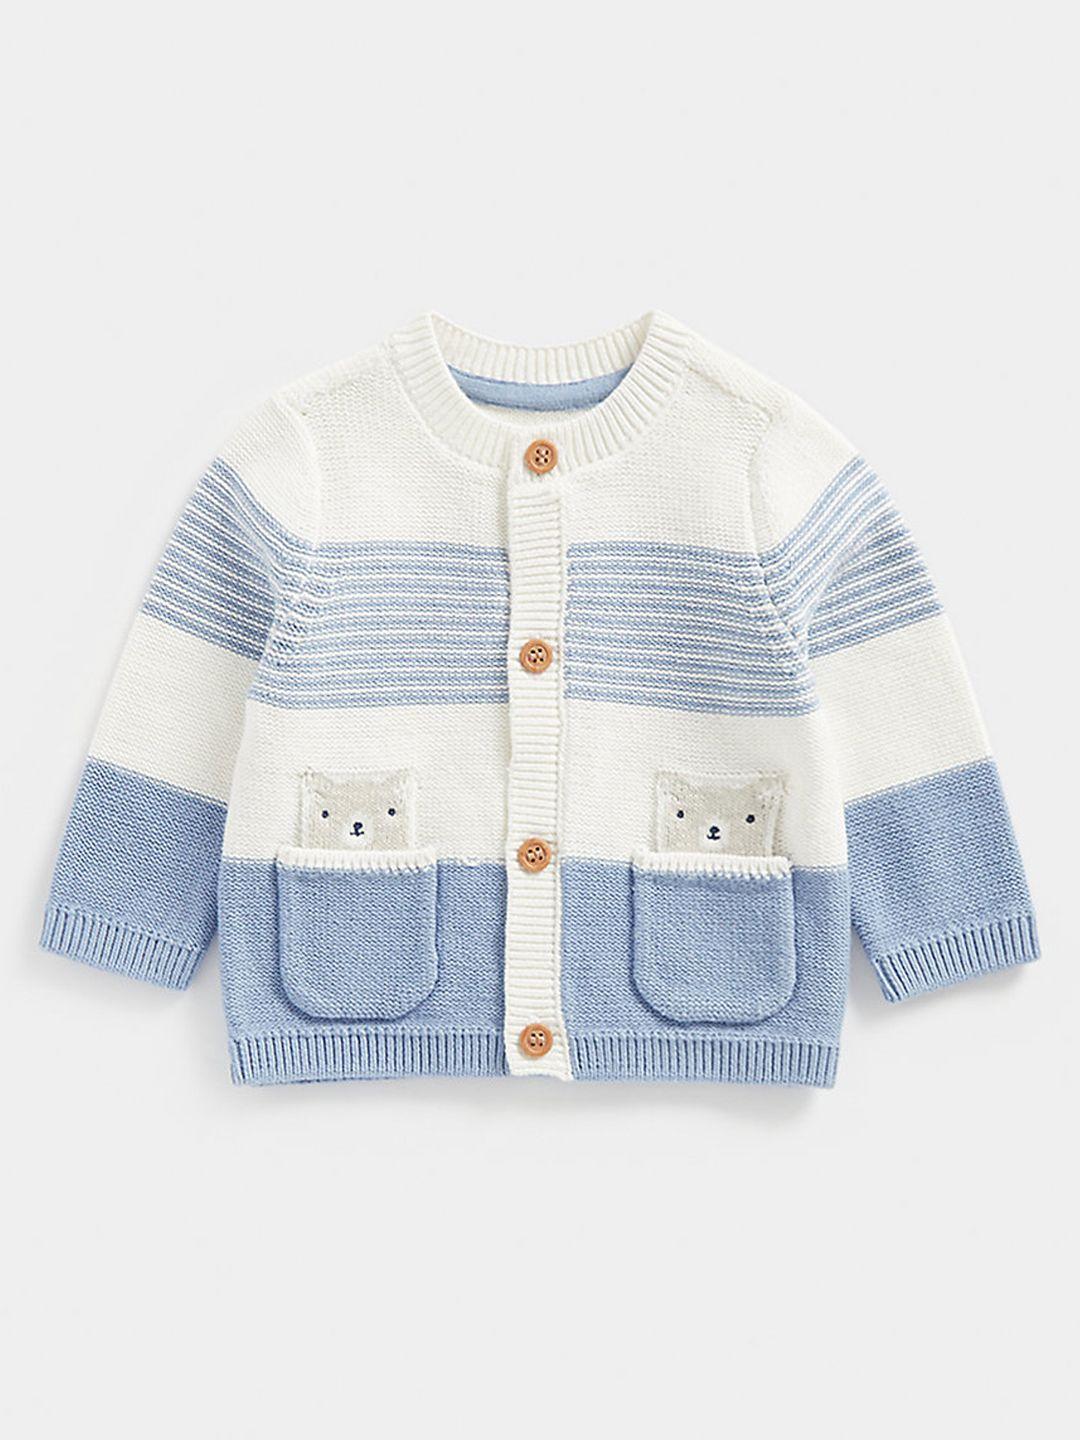 mothercare-boys-blue-&-white-striped-organic-cotton-cardigan-with-bear-patch-pockets